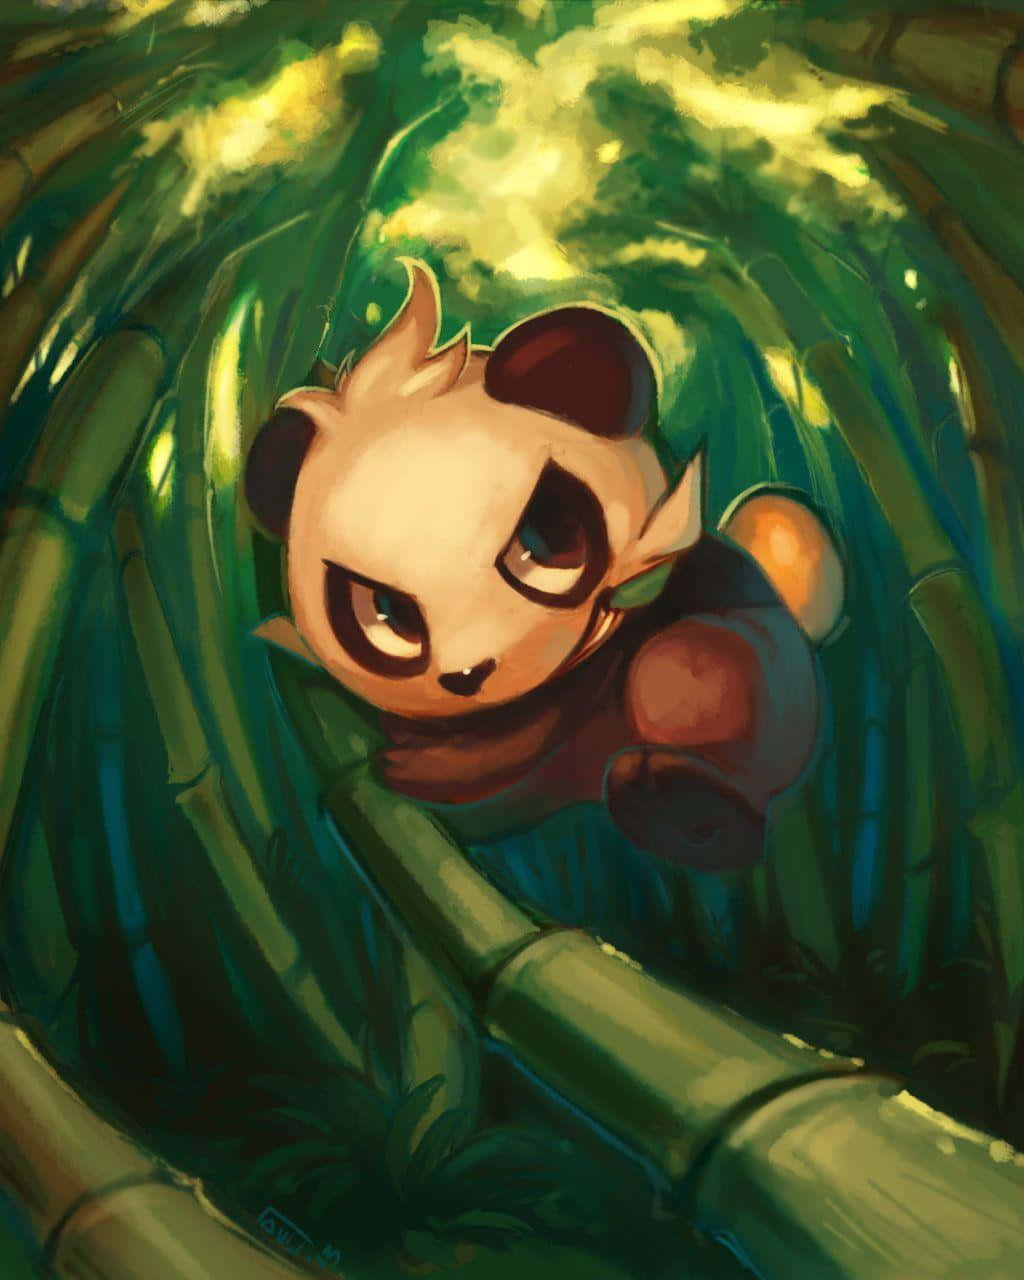 Pancham In Bamboo Forest Wallpaper